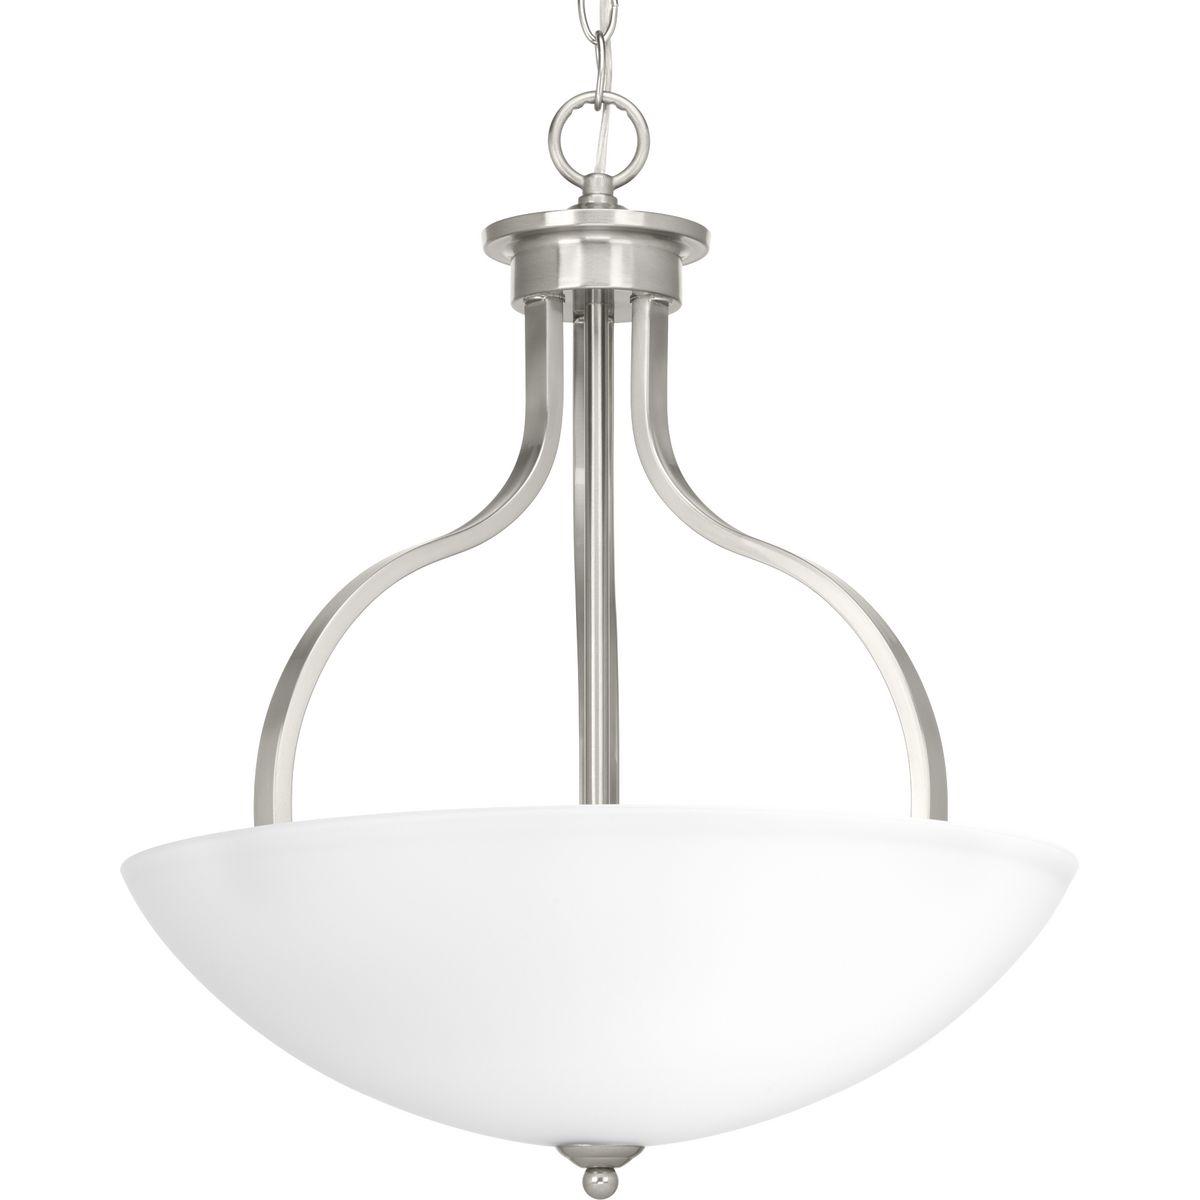 Hubbell P500071-009 The Laird collection provides a contemporary complement to casual interiors popular in today's homes. Glass shades add distinction and provide pleasing illumination to any room, while scrolling arms create an airy effect. Inverted Pendant in an Brushed Ni